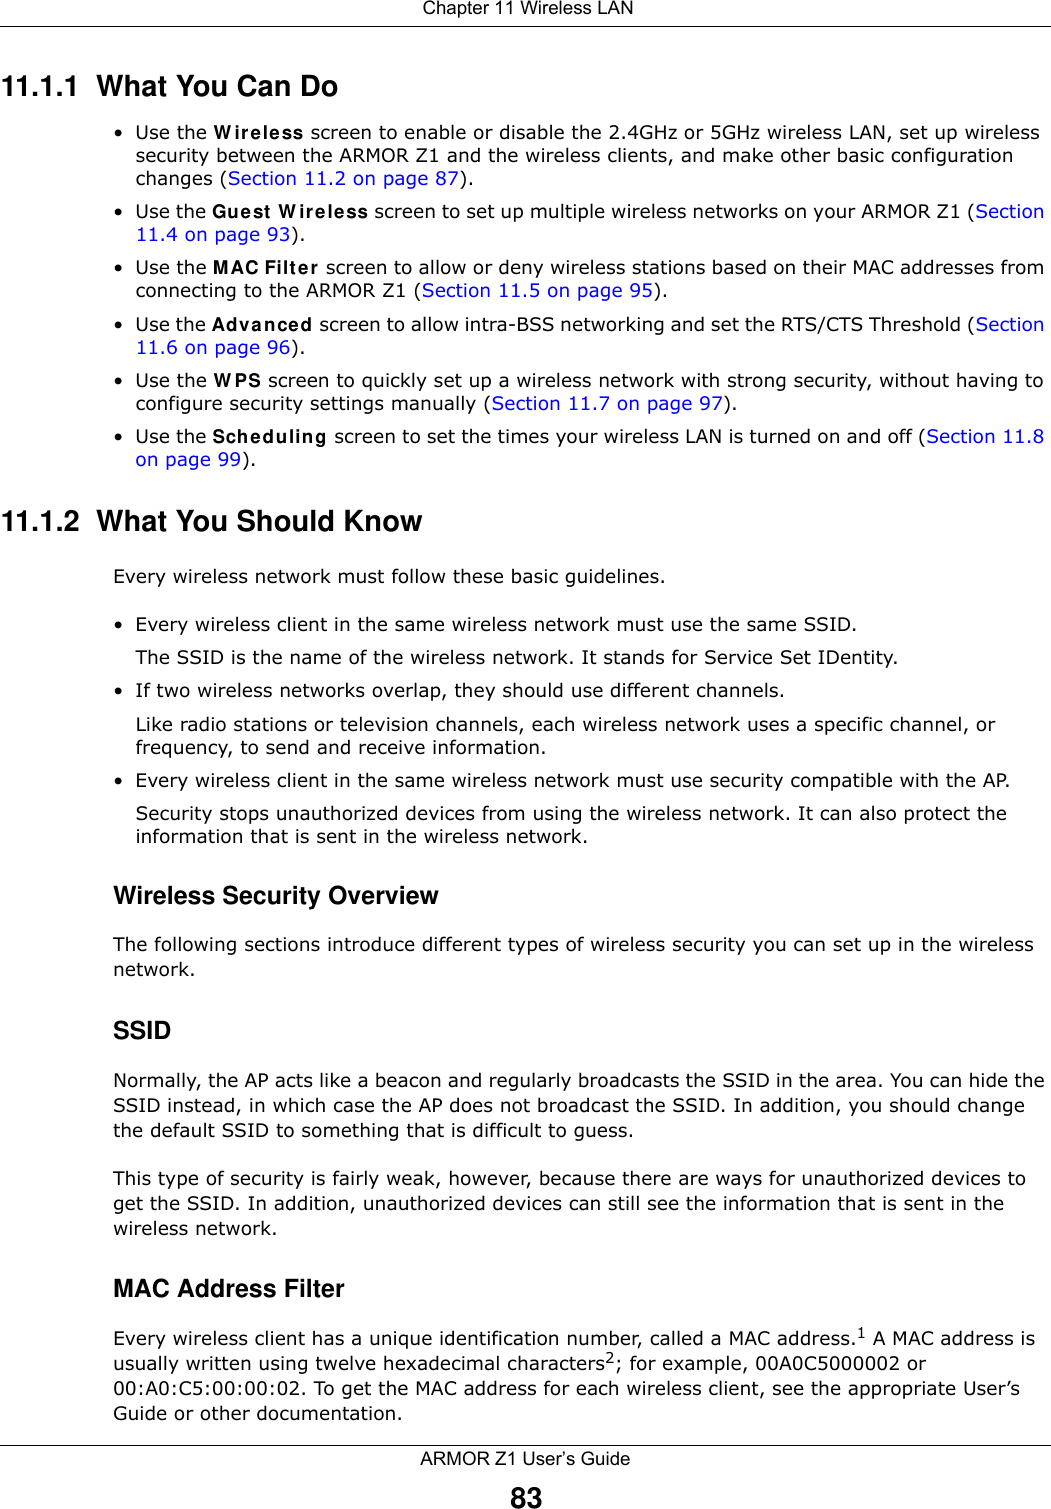  Chapter 11 Wireless LANARMOR Z1 User’s Guide8311.1.1  What You Can Do•Use the Wireless screen to enable or disable the 2.4GHz or 5GHz wireless LAN, set up wireless security between the ARMOR Z1 and the wireless clients, and make other basic configuration changes (Section 11.2 on page 87).•Use the Guest Wireless screen to set up multiple wireless networks on your ARMOR Z1 (Section 11.4 on page 93). •Use the MAC Filter screen to allow or deny wireless stations based on their MAC addresses from connecting to the ARMOR Z1 (Section 11.5 on page 95).•Use the Advanced screen to allow intra-BSS networking and set the RTS/CTS Threshold (Section 11.6 on page 96).•Use the WPS screen to quickly set up a wireless network with strong security, without having to configure security settings manually (Section 11.7 on page 97).•Use the Scheduling screen to set the times your wireless LAN is turned on and off (Section 11.8 on page 99).11.1.2  What You Should KnowEvery wireless network must follow these basic guidelines.• Every wireless client in the same wireless network must use the same SSID.The SSID is the name of the wireless network. It stands for Service Set IDentity.• If two wireless networks overlap, they should use different channels.Like radio stations or television channels, each wireless network uses a specific channel, or frequency, to send and receive information.• Every wireless client in the same wireless network must use security compatible with the AP.Security stops unauthorized devices from using the wireless network. It can also protect the information that is sent in the wireless network.Wireless Security OverviewThe following sections introduce different types of wireless security you can set up in the wireless network.SSIDNormally, the AP acts like a beacon and regularly broadcasts the SSID in the area. You can hide the SSID instead, in which case the AP does not broadcast the SSID. In addition, you should change the default SSID to something that is difficult to guess.This type of security is fairly weak, however, because there are ways for unauthorized devices to get the SSID. In addition, unauthorized devices can still see the information that is sent in the wireless network.MAC Address FilterEvery wireless client has a unique identification number, called a MAC address.1 A MAC address is usually written using twelve hexadecimal characters2; for example, 00A0C5000002 or 00:A0:C5:00:00:02. To get the MAC address for each wireless client, see the appropriate User’s Guide or other documentation.